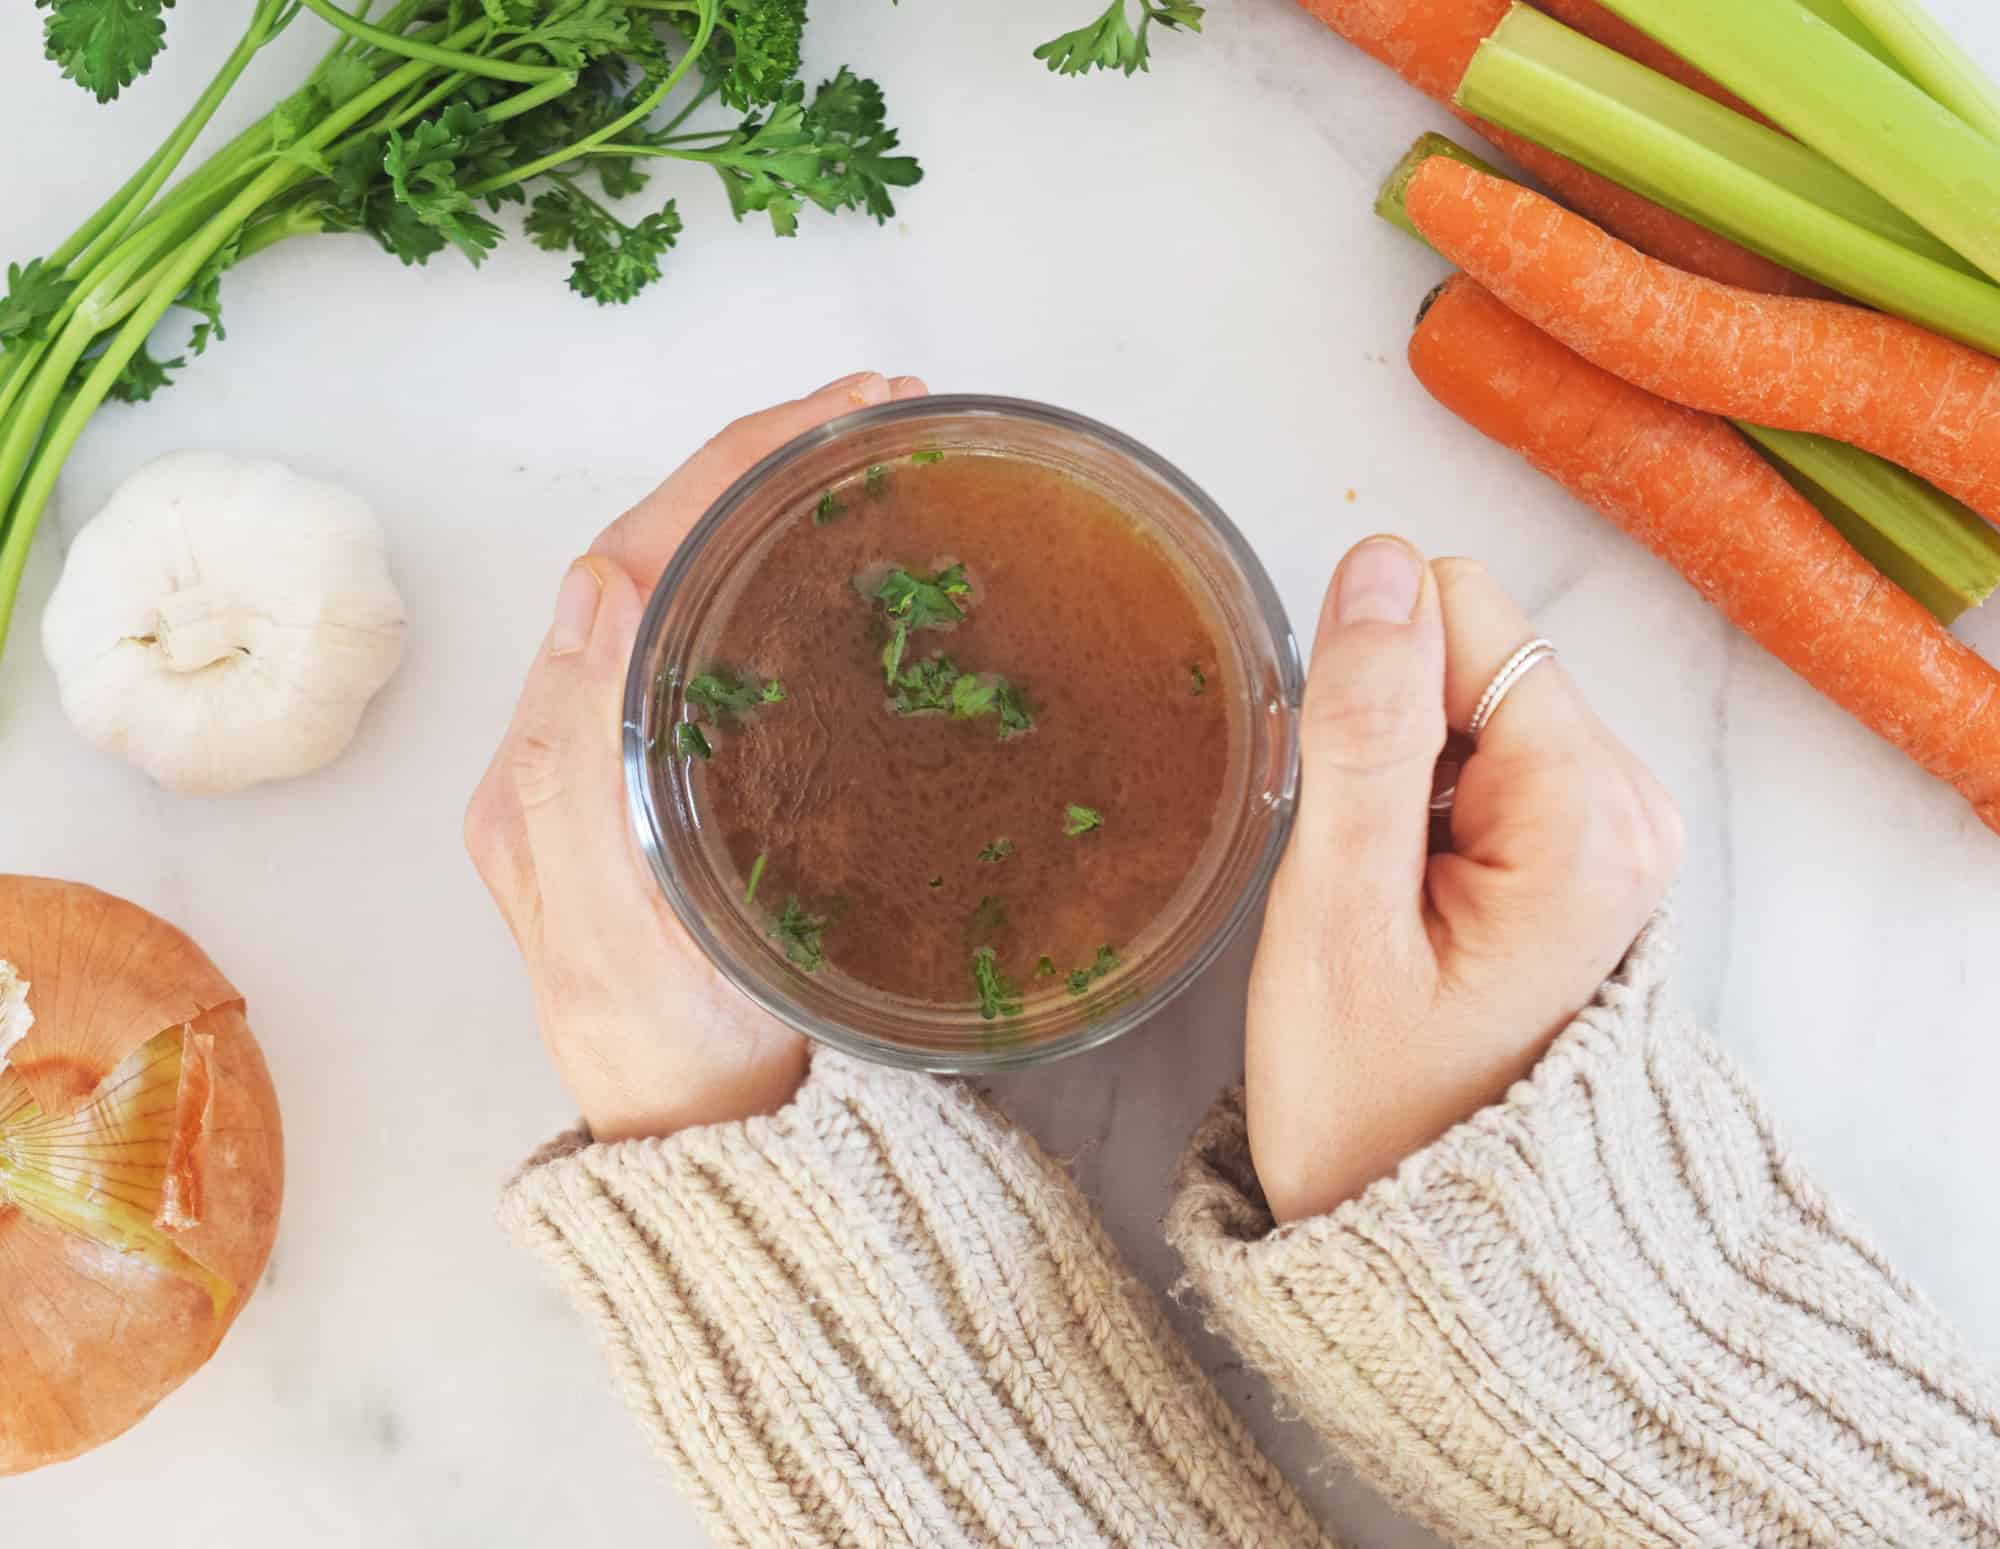 Hands holding a cup of homemade bone broth with parsley sprinkled on top. Carrots, celery, garlic and onion surround it.